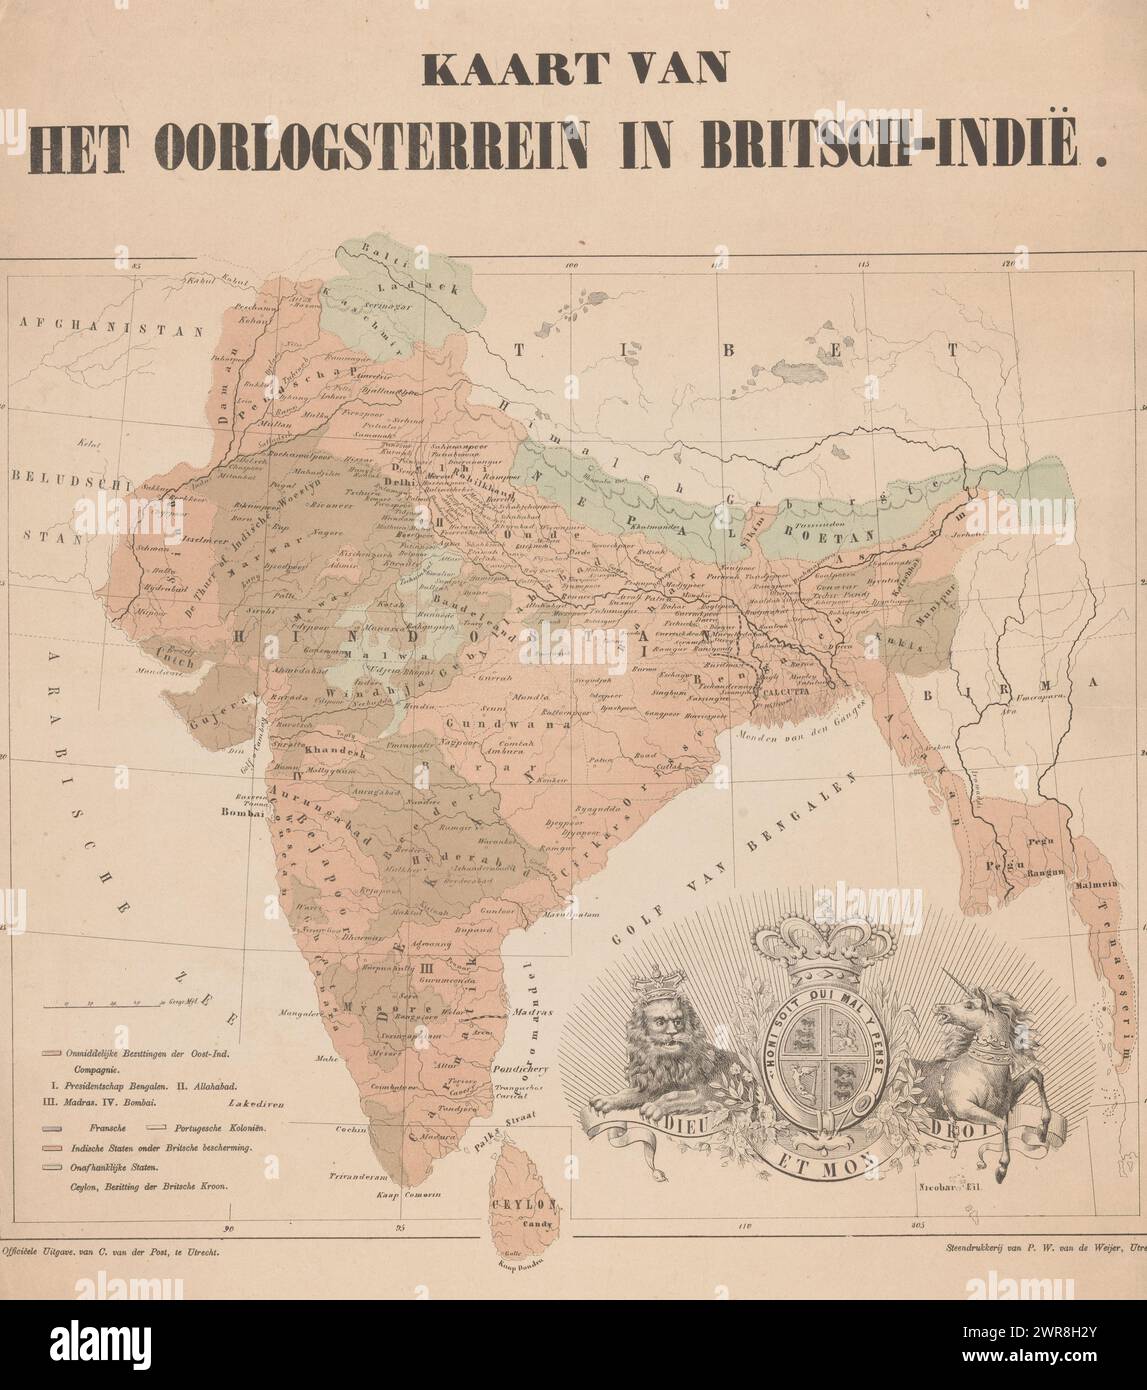 Map of European colonial possessions in India, Map of the war zone in British India (title on object), The coat of arms of the United Kingdom at the bottom of the image., print maker: anonymous, printer: Pieter Wilhelmus van de Weijer, publisher: C. van der Post (II), Utrecht, 1830 - 1879, paper, height 478 mm × width 442 mm, print Stock Photo